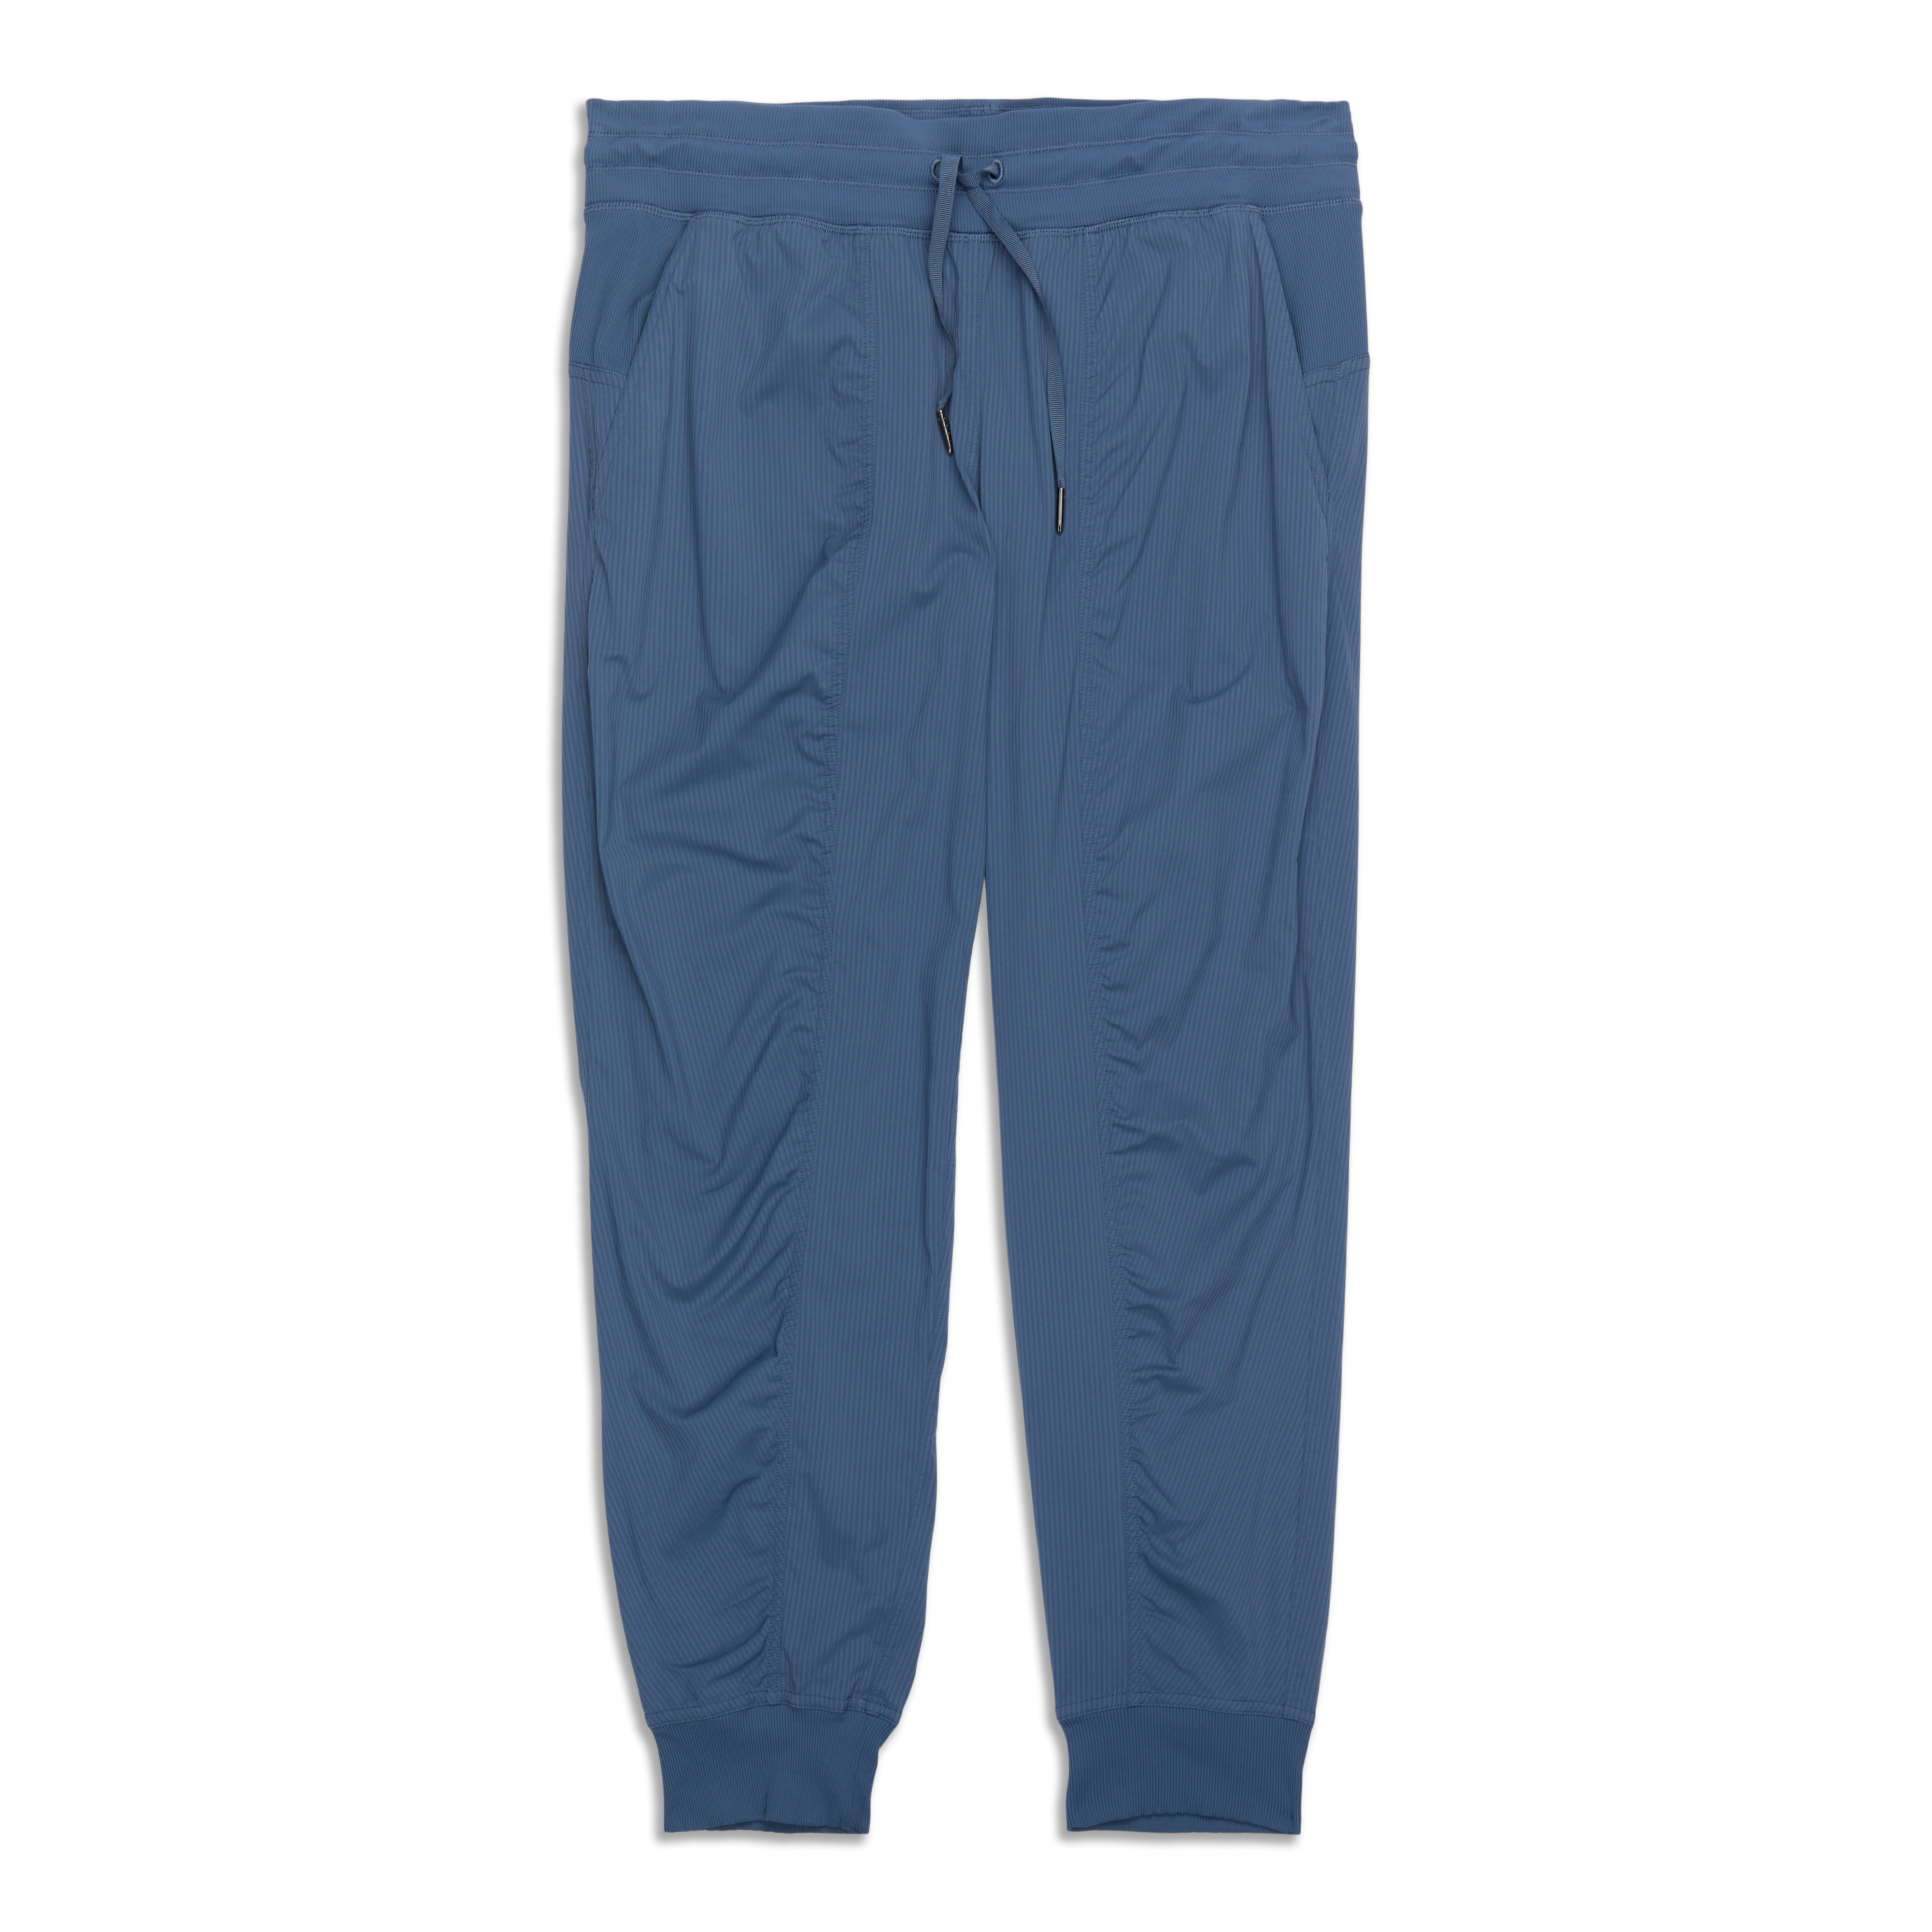 Find more Lululemon Dance Studio Joggers Size 8 for sale at up to